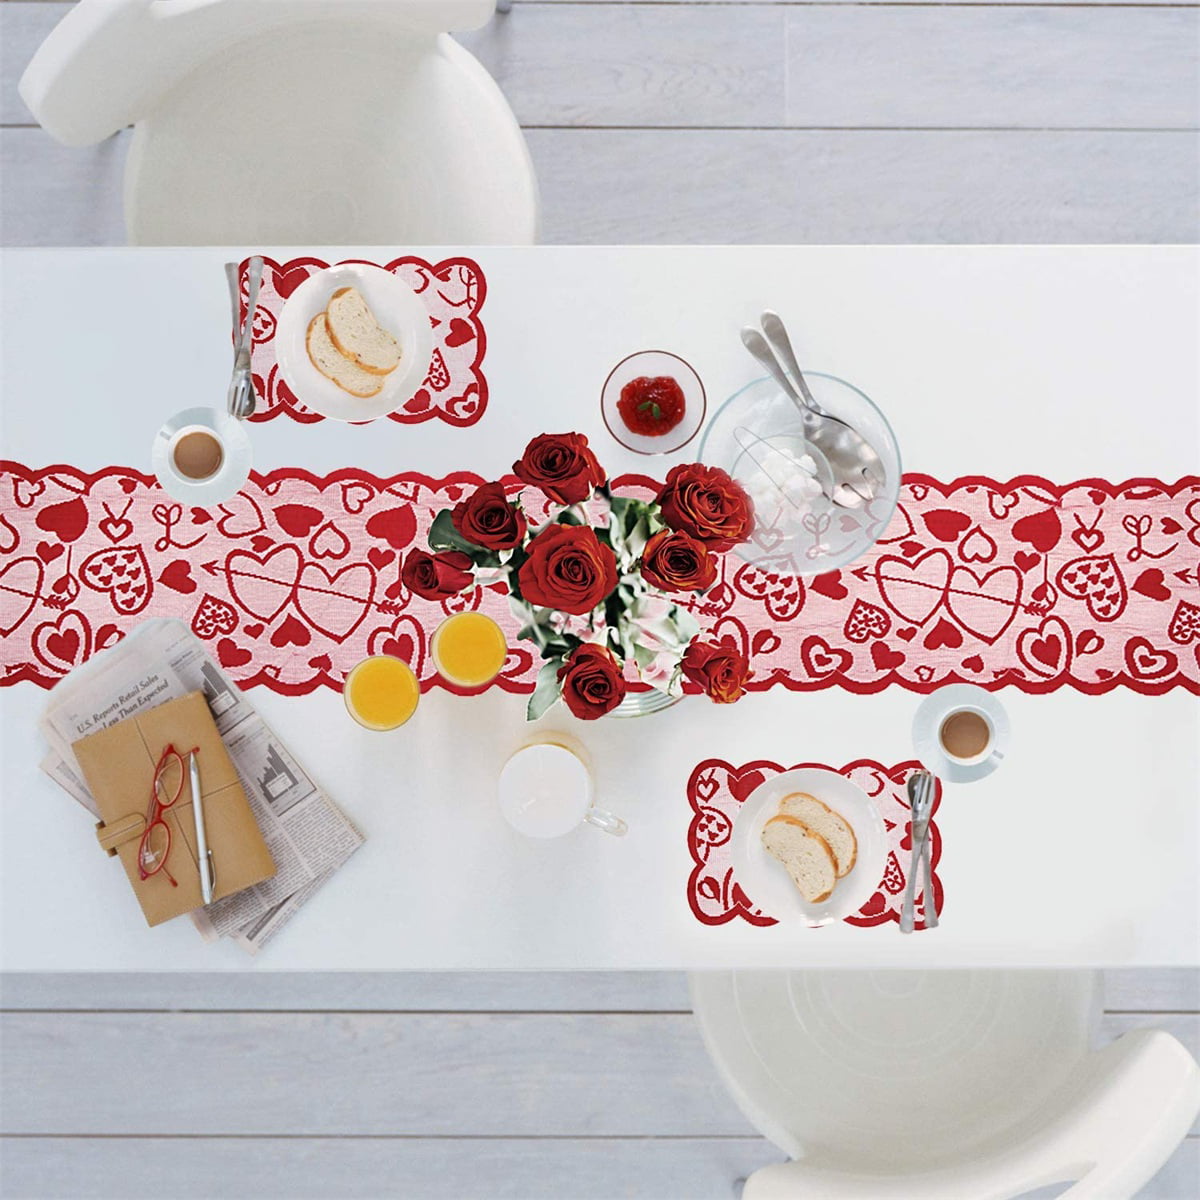 Oarencol Red Heart Flower Table Runner Valentines Florals 13x90 inch Table Cover for Kitchen Party Holiday Dining Home Everyday 